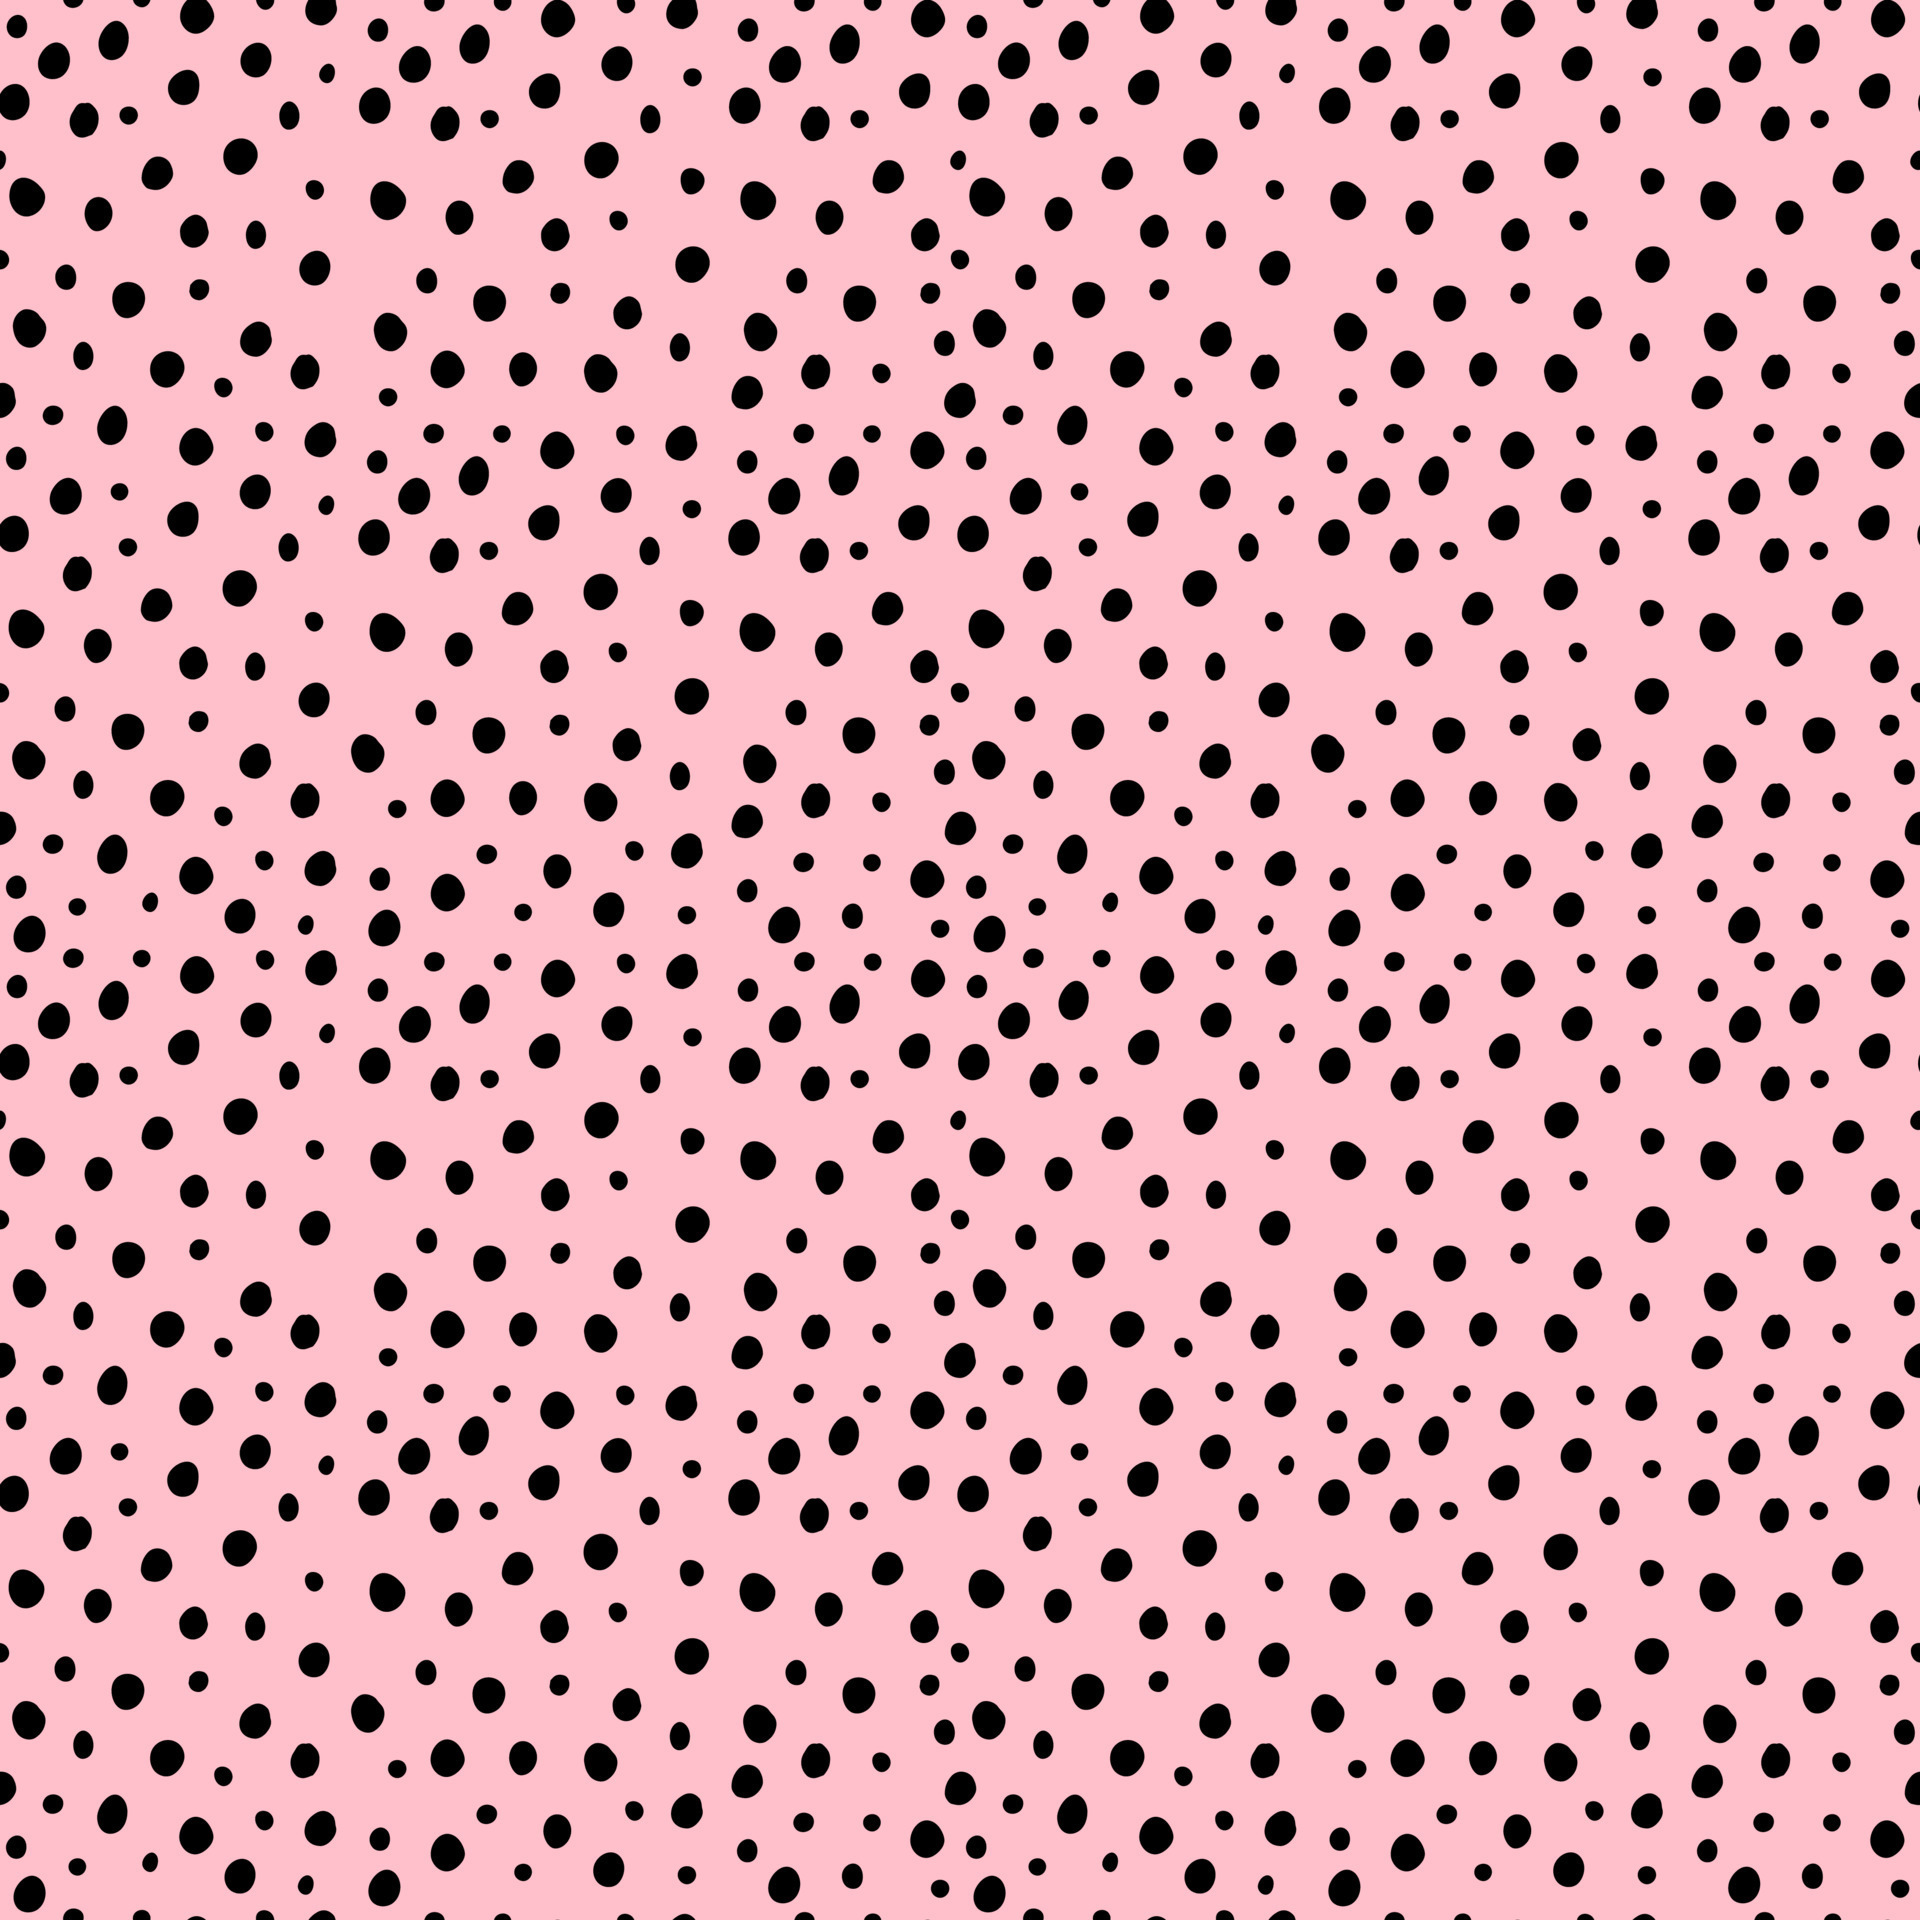 1920x1920 Random small black polka dot background. Print with irregular chaotic points. Vector seamless hand drawn pattern for design, textile, wrapping paper, scrapbooking. 7975417 Vector Art